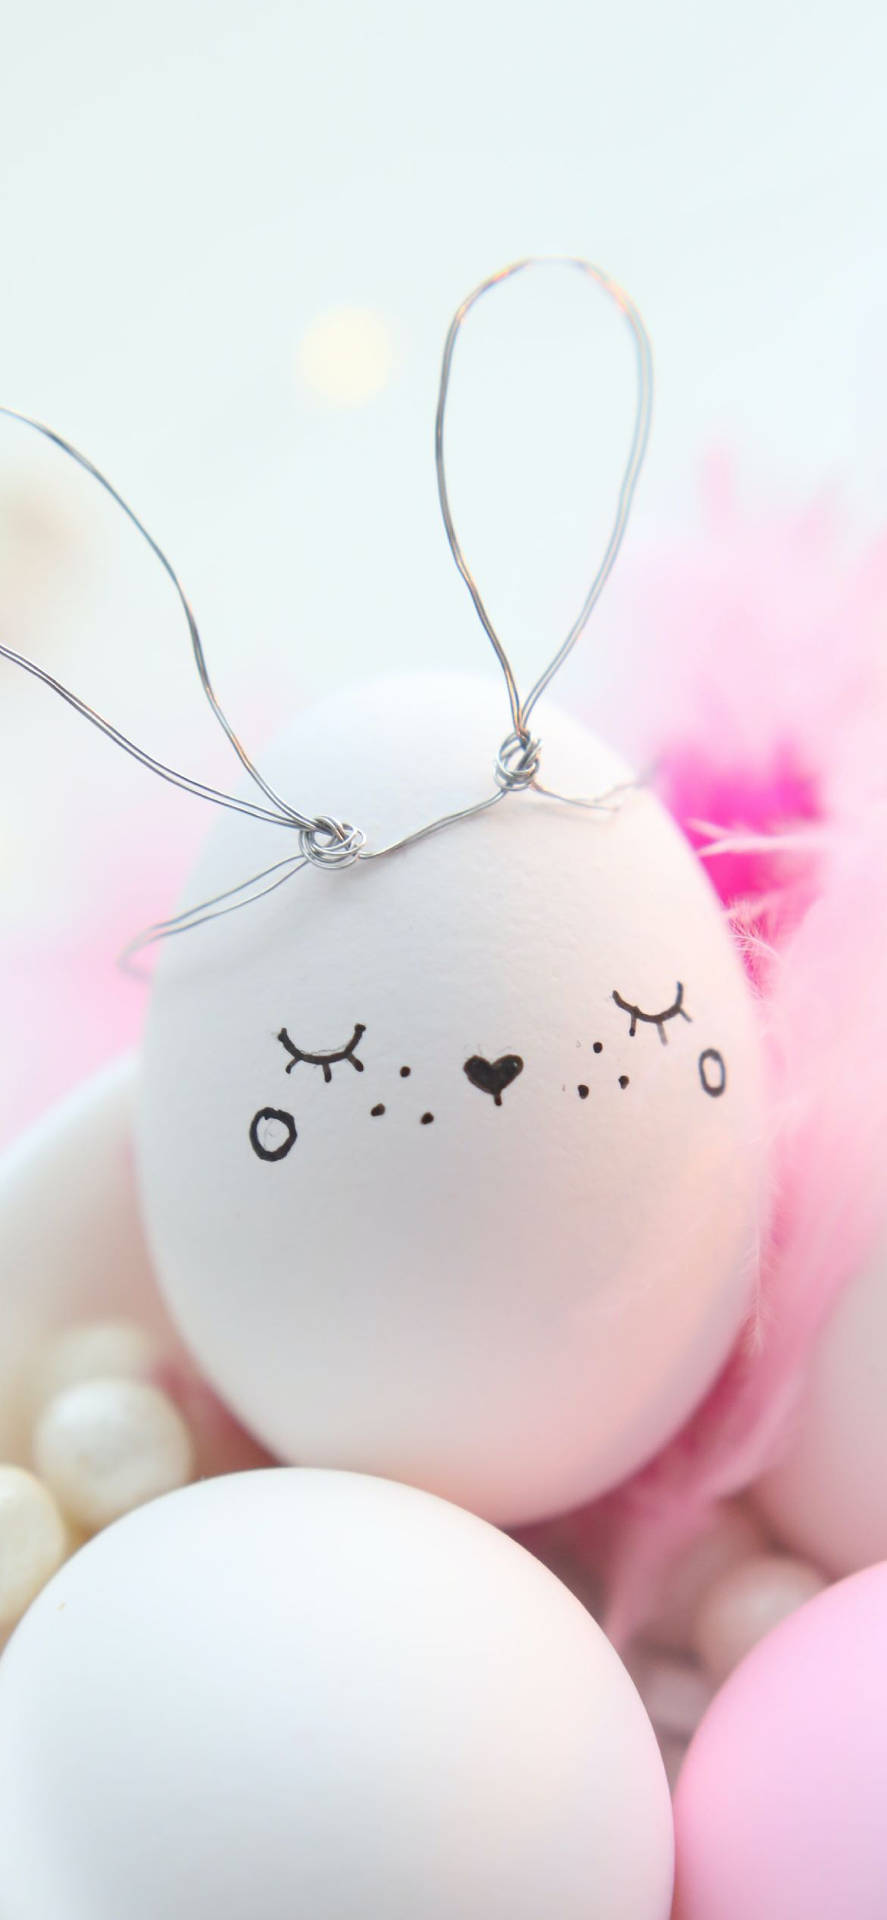 Easter Bunny Eggs With Pink And White Feathers Wallpaper